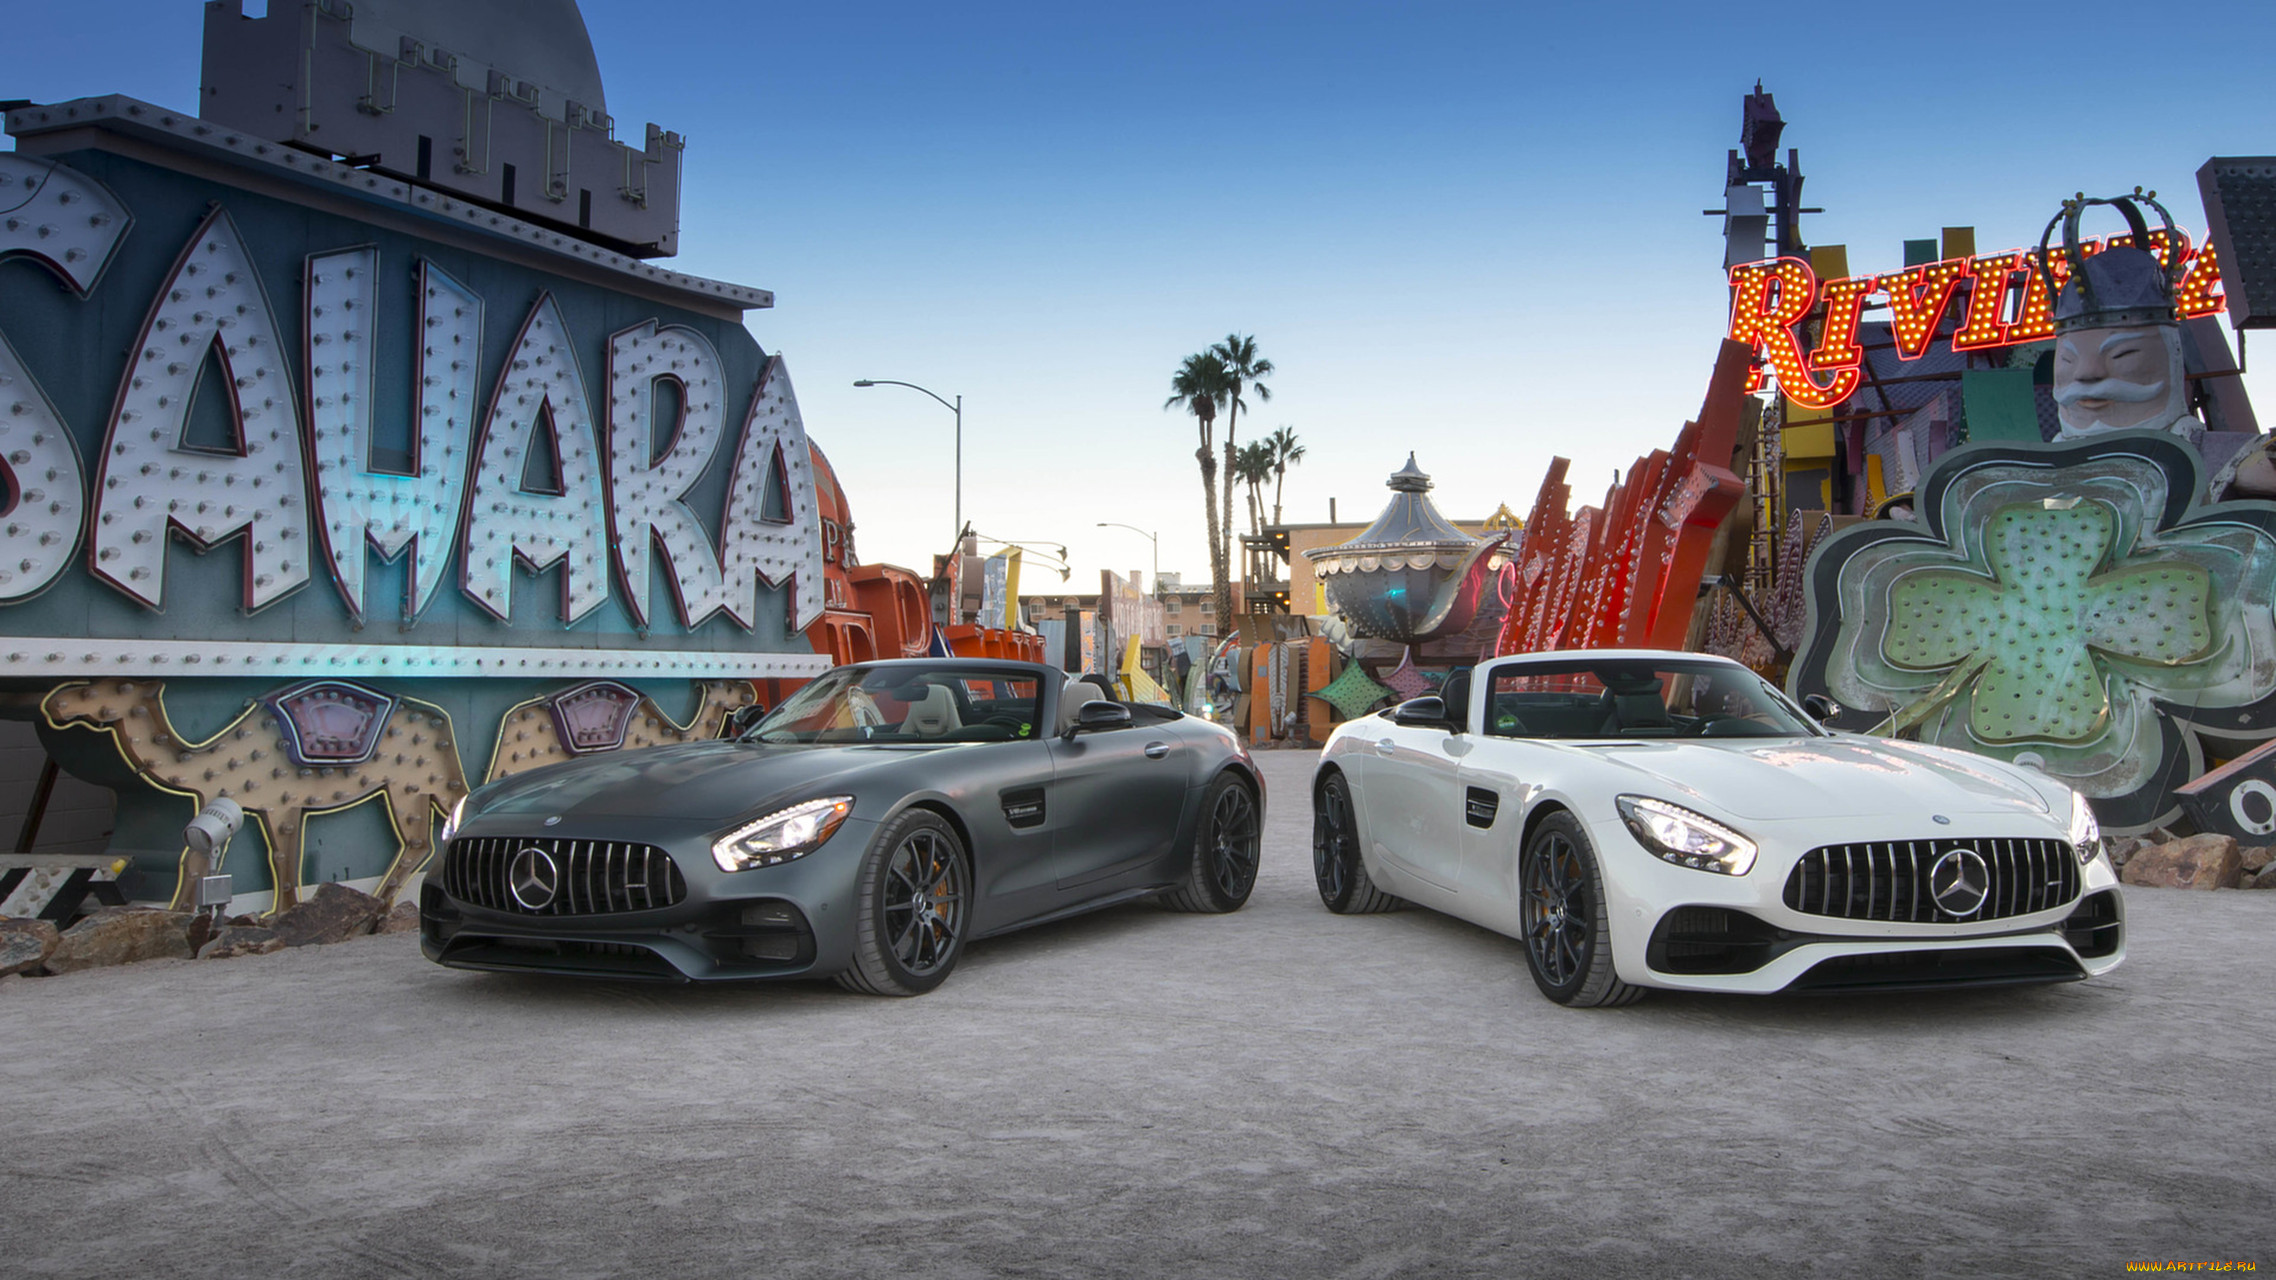 mercedes-benz amg-gt and gt-c roadsters 2018, , mercedes-benz, 2018, -roadsters, amg-gt, gt-c